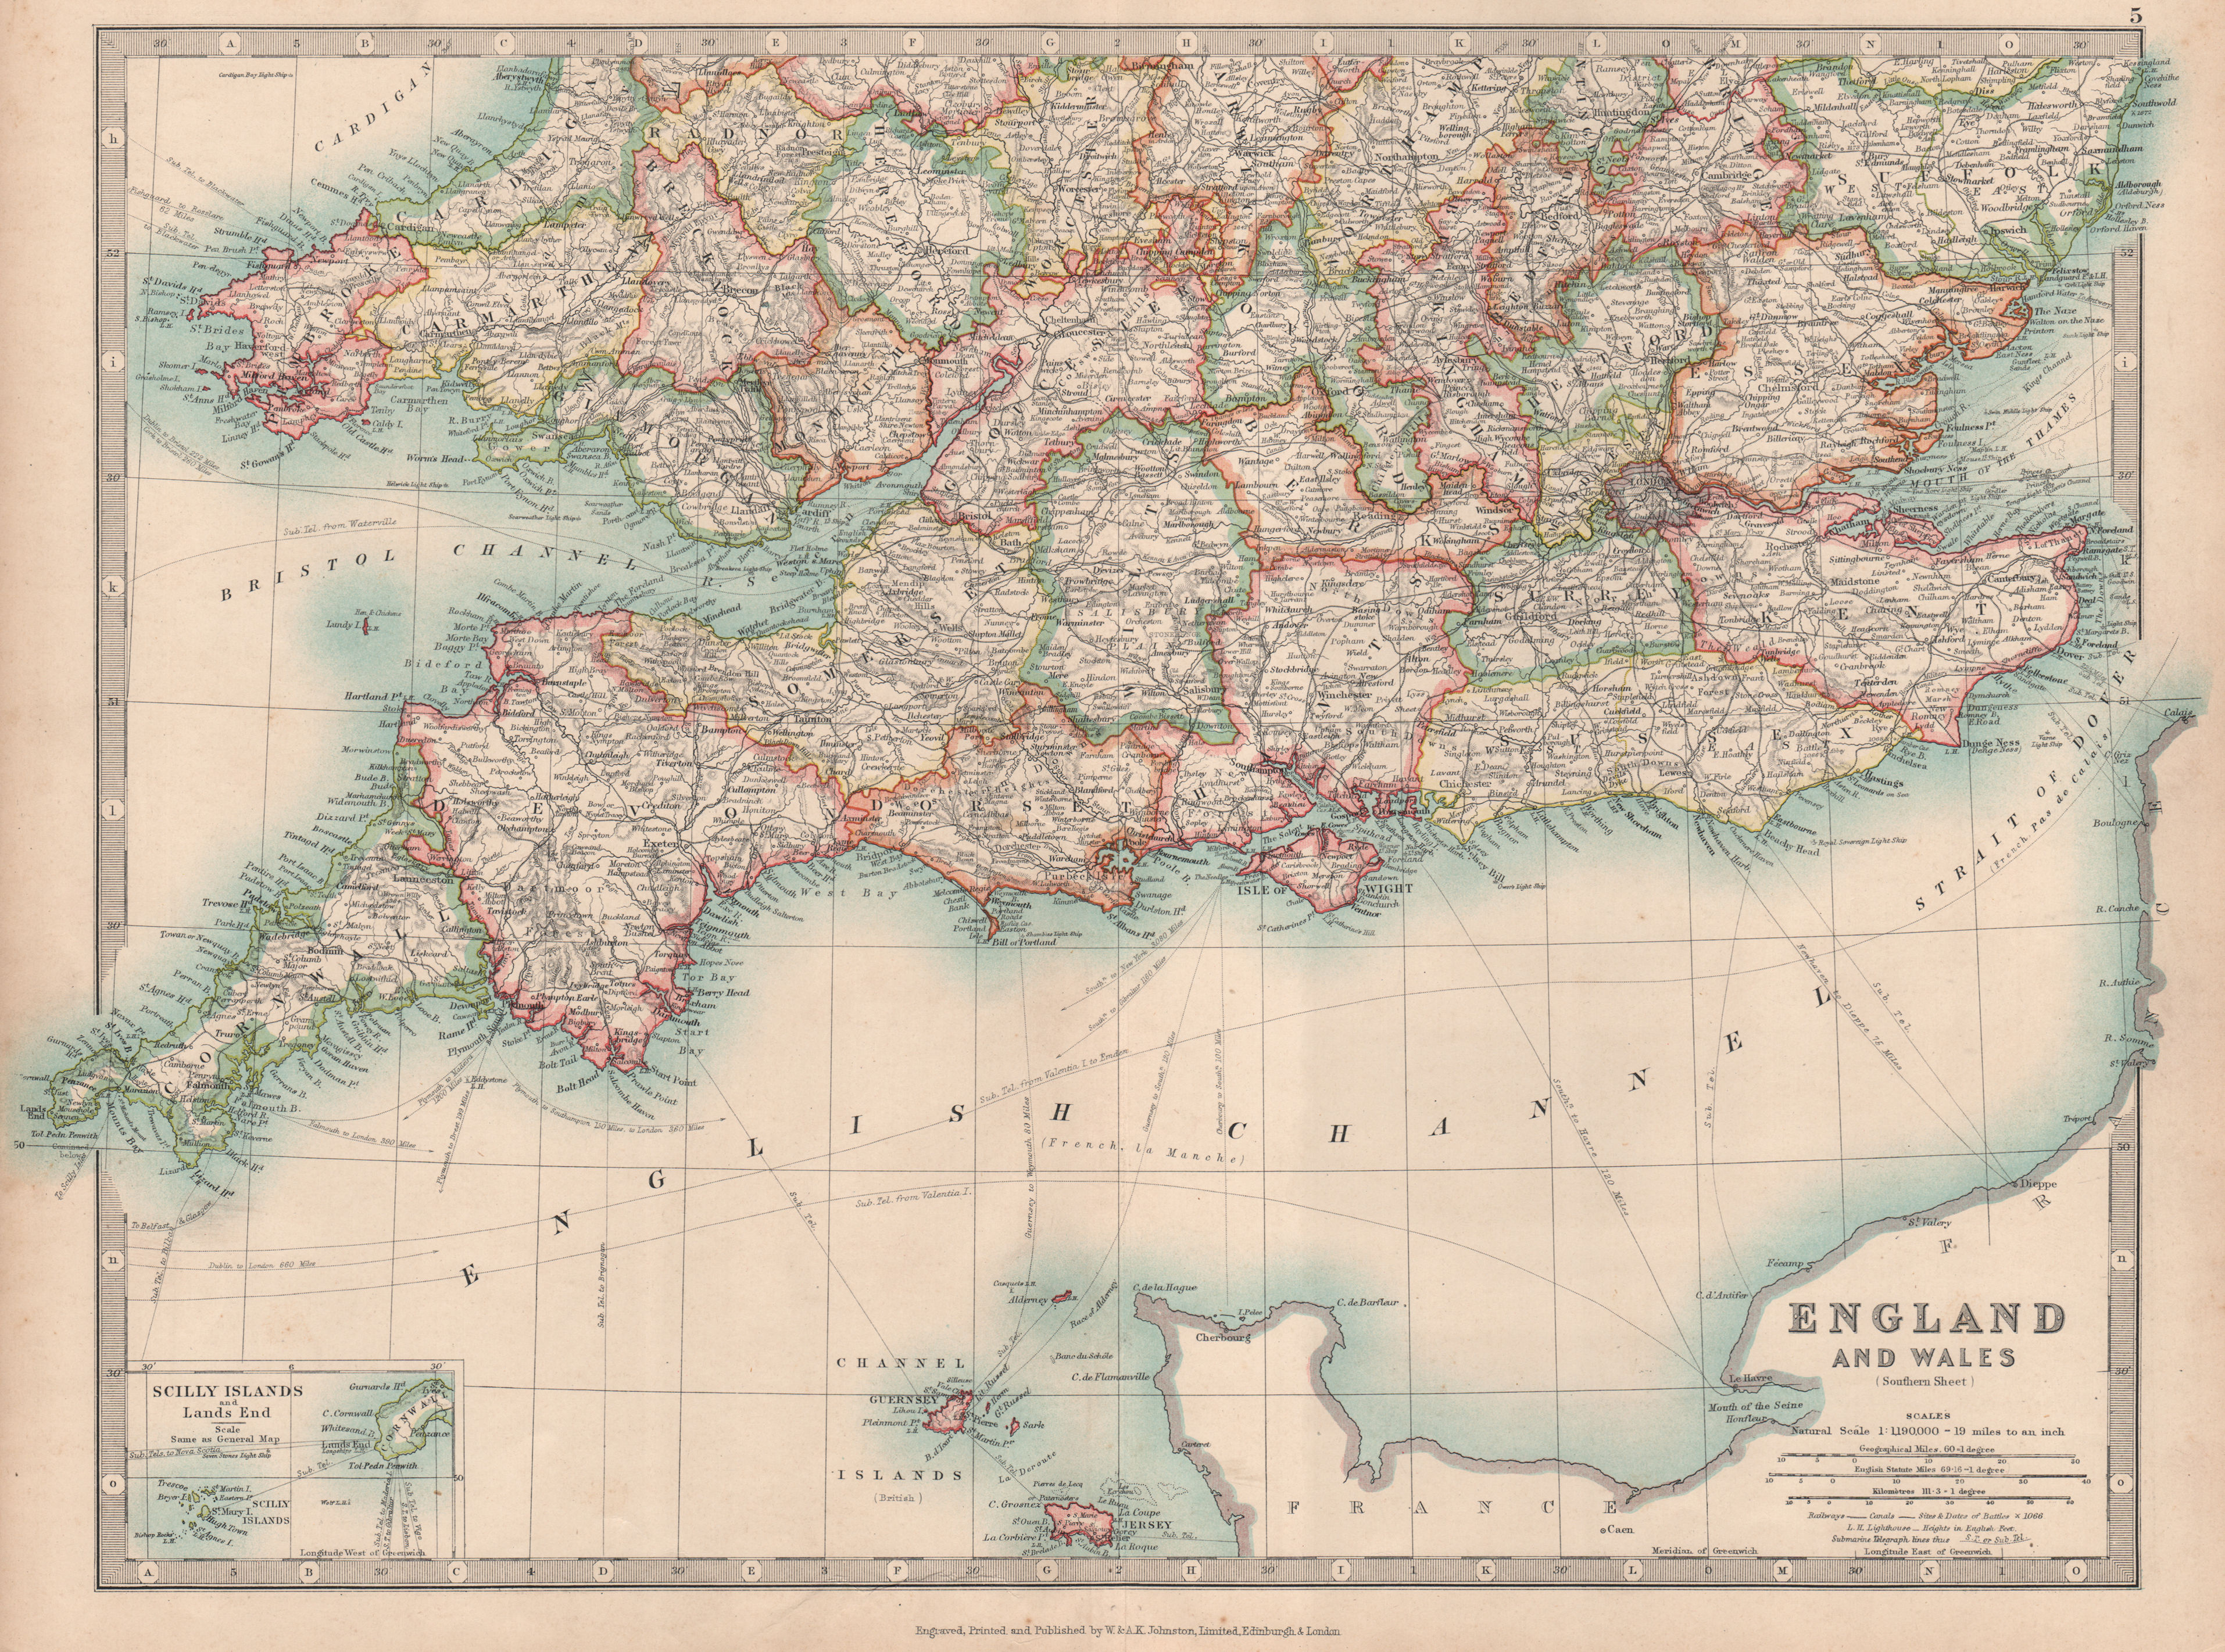 SOUTHERN ENGLAND & WALES. Shows Worcestershire enclaves. JOHNSTON 1912 old map